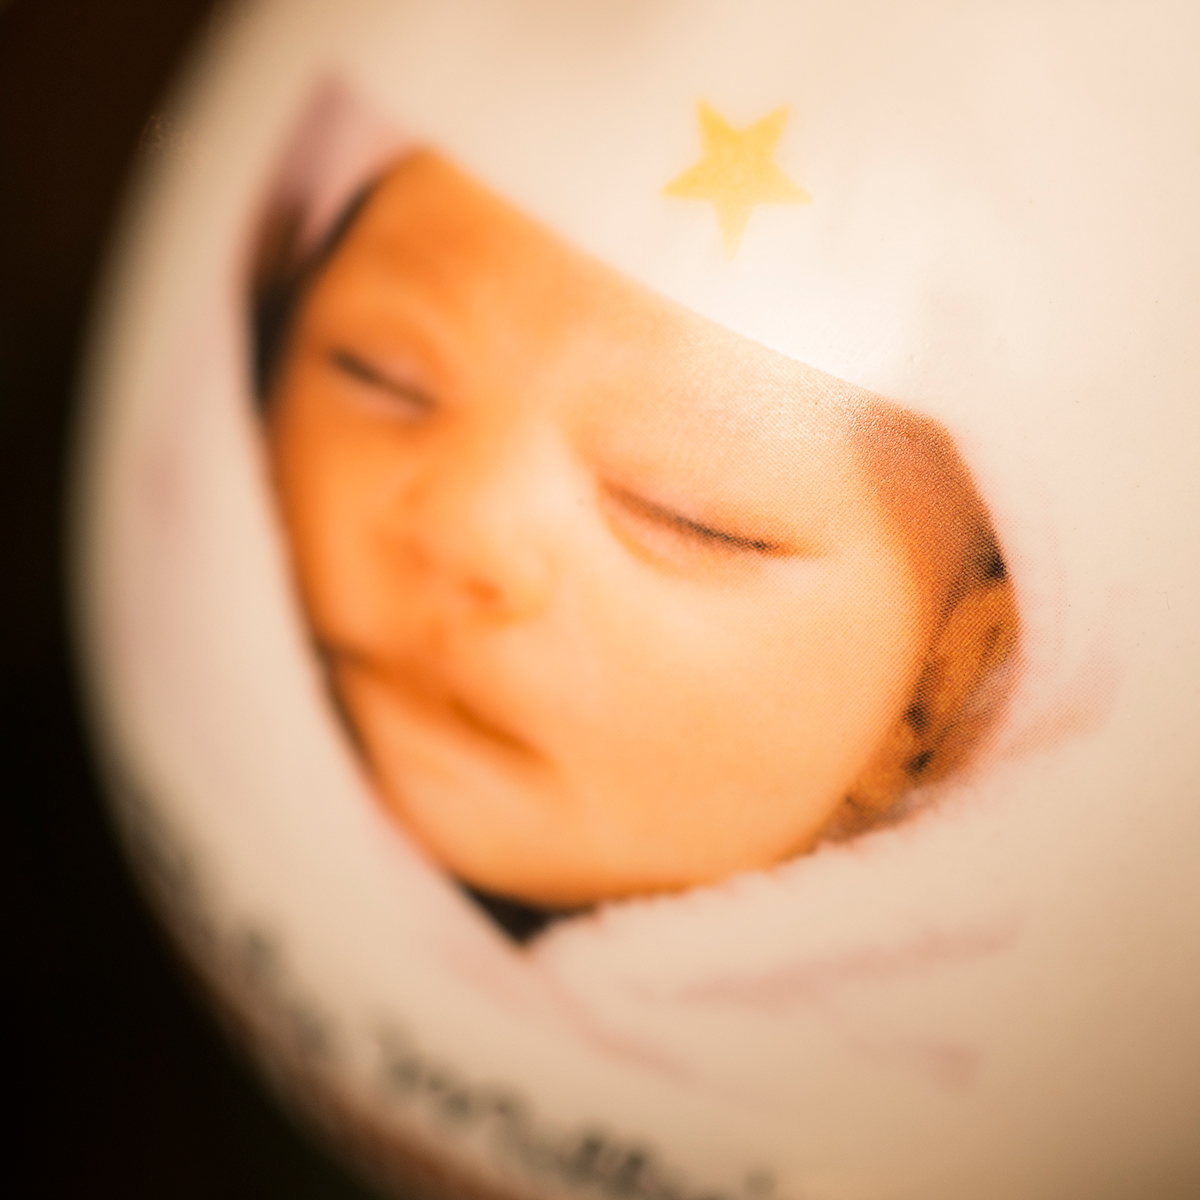 Photo Upload Bauble - Baby's First Christmas